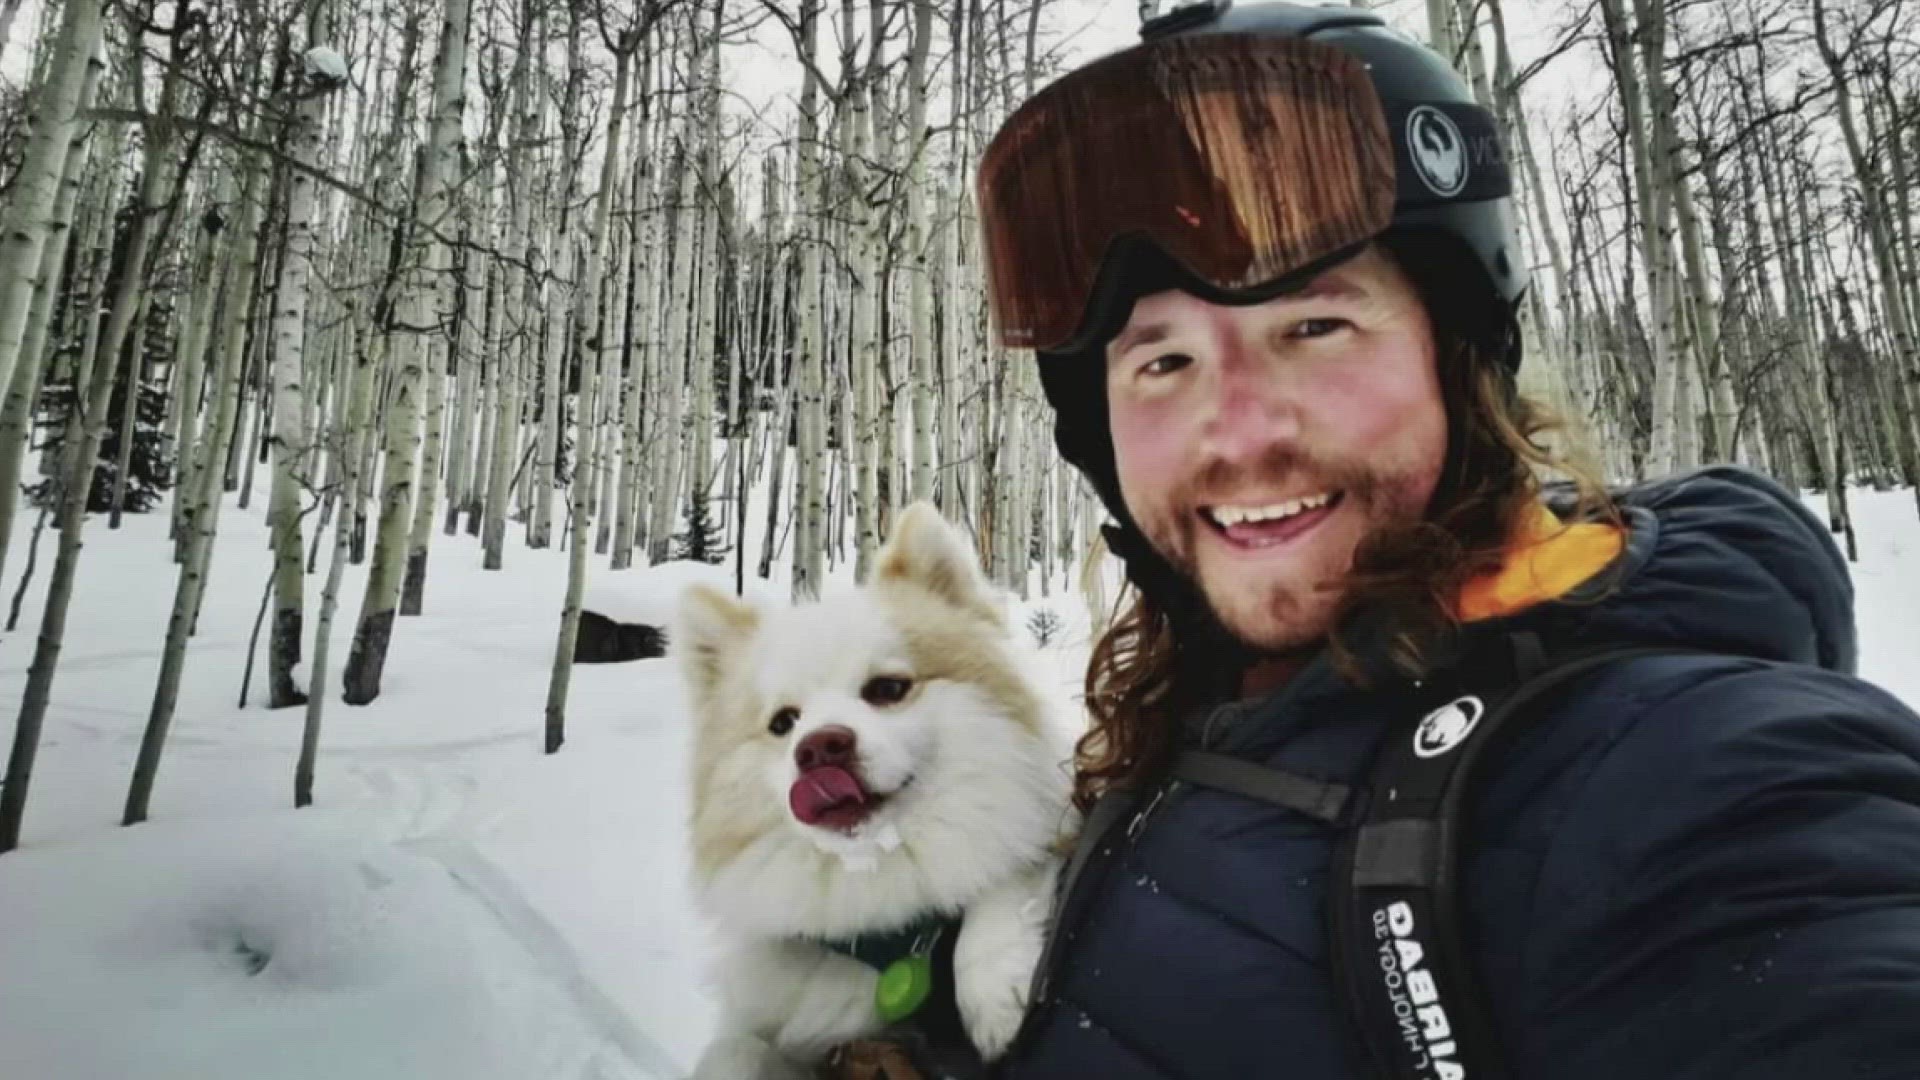 The family of a man in Glenwood Springs is remembering him for his life of adventure. He, along with 2 others were caught in an avalanche on Friday.